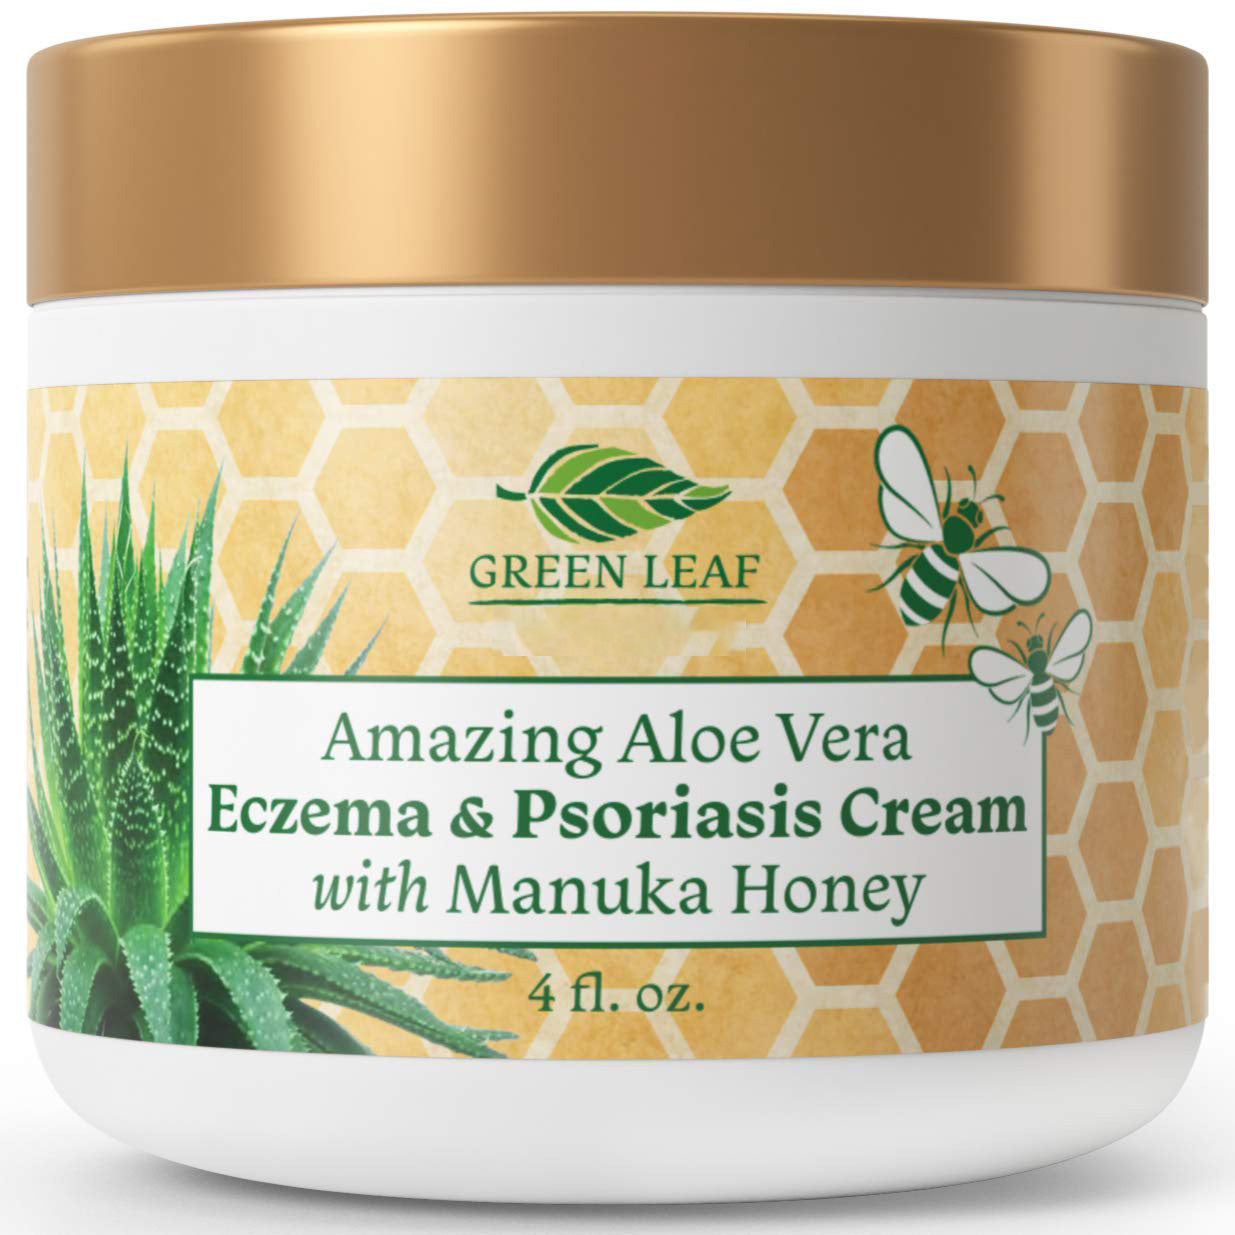 Manuka Honey Eczema Cream Moisturizing Lotion Treatment For Psoriasis Relief - Itchy, Dry Skin Rash Healing Ointment - Skin Soothing Moisturizer For Kids, Adults, Baby Ultra Strength Honey Creme